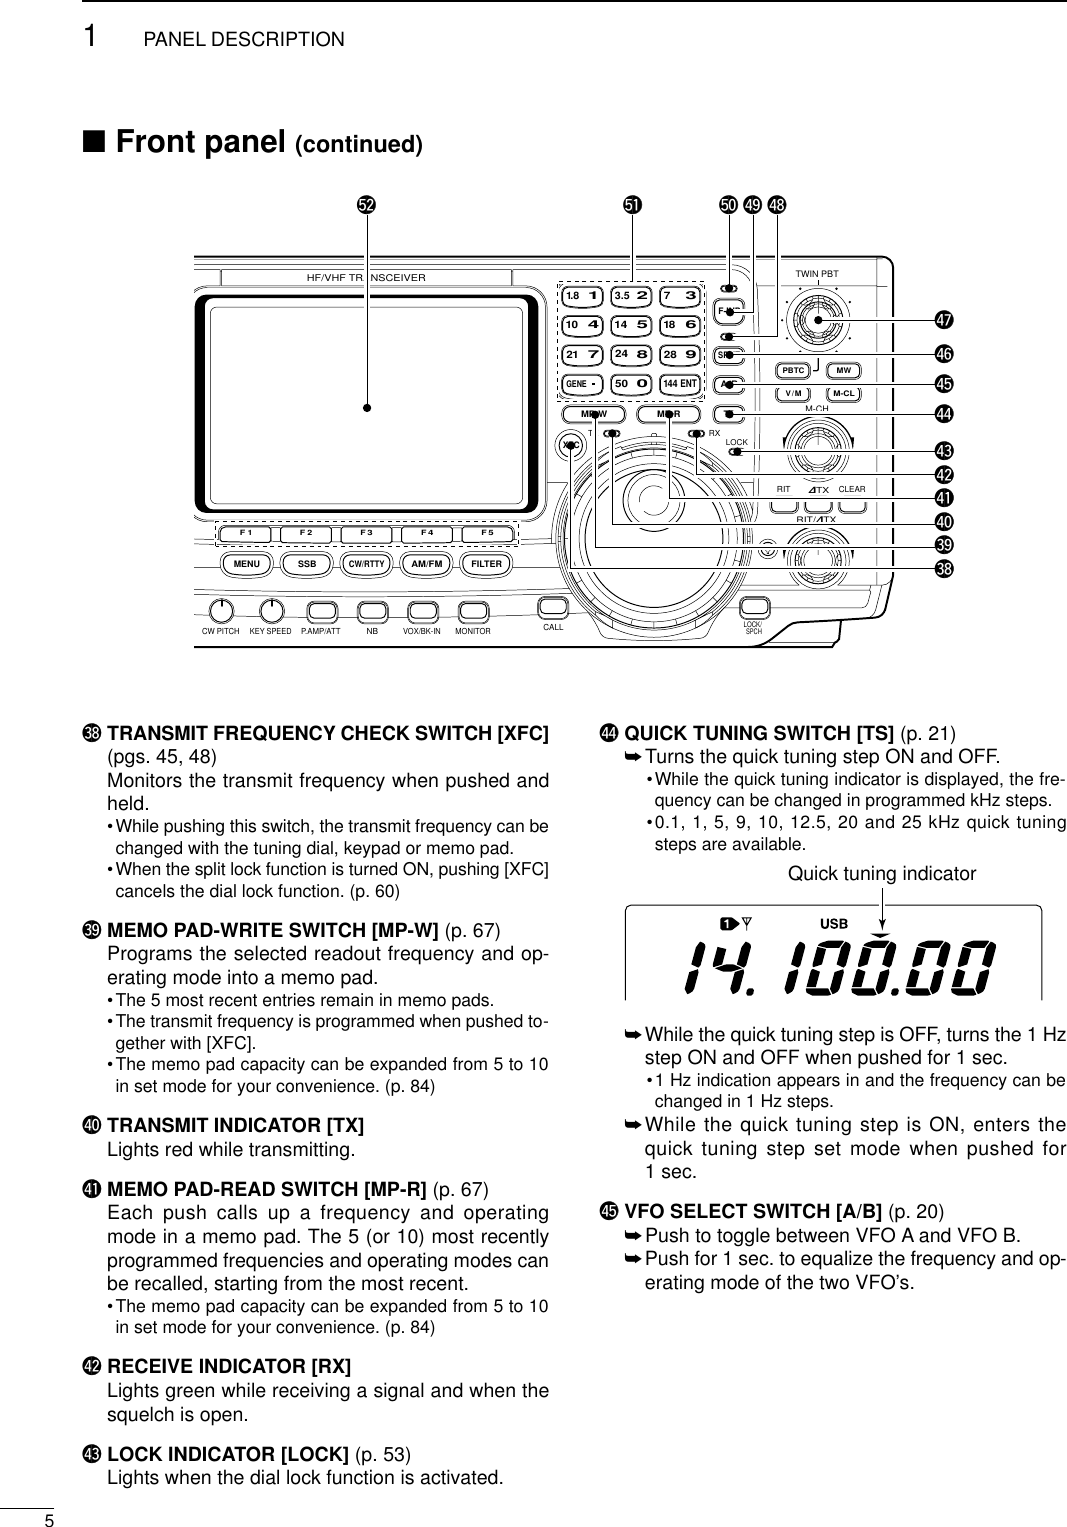 ■Front panel (continued)#8 TRANSMIT FREQUENCY CHECK SWITCH [XFC](pgs. 45, 48)Monitors the transmit frequency when pushed andheld.•While pushing this switch, the transmit frequency can bechanged with the tuning dial, keypad or memo pad.•When the split lock function is turned ON, pushing [XFC]cancels the dial lock function. (p. 60)#9 MEMO PAD-WRITE SWITCH [MP-W] (p. 67)Programs the selected readout frequency and op-erating mode into a memo pad.•The 5 most recent entries remain in memo pads.•The transmit frequency is programmed when pushed to-gether with [XFC].•The memo pad capacity can be expanded from 5 to 10in set mode for your convenience. (p. 84)$0 TRANSMIT INDICATOR [TX]Lights red while transmitting.$1 MEMO PAD-READ SWITCH [MP-R] (p. 67)Each push calls up a frequency and operatingmode in a memo pad. The 5 (or 10) most recentlyprogrammed frequencies and operating modes canbe recalled, starting from the most recent.•The memo pad capacity can be expanded from 5 to 10in set mode for your convenience. (p. 84)$2 RECEIVE INDICATOR [RX]Lights green while receiving a signal and when thesquelch is open.$3 LOCK INDICATOR [LOCK] (p. 53)Lights when the dial lock function is activated.$4 QUICK TUNING SWITCH [TS] (p. 21)➥Turns the quick tuning step ON and OFF.•While the quick tuning indicator is displayed, the fre-quency can be changed in programmed kHz steps.•0.1, 1, 5, 9, 10, 12.5, 20 and 25 kHz quick tuningsteps are available.➥While the quick tuning step is OFF, turns the 1 Hzstep ON and OFF when pushed for 1 sec.•1 Hz indication appears in and the frequency can bechanged in 1 Hz steps.➥While the quick tuning step is ON, enters thequick tuning step set mode when pushed for1 sec.$5 VFO SELECT SWITCH [A/B] (p. 20)➥Push to toggle between VFO A and VFO B.➥Push for 1 sec. to equalize the frequency and op-erating mode of the two VFO’s. Quick tuning indicator51PANEL DESCRIPTIONNRA/NOTCHNERANTHF/VHF TRANSCEIVERNRNOTCHAFMIC GAINRF PWRCW PITCHF 1F 2F 3F 4F 5XFCMP-WGENE5002172482891451041863.521.8173144ENTMP-RTX RX LOCKTWIN PBTM-CHRITCLEAR∂TXRIT/∂TXTSSPLITPBTCF-INPA/BV/MMWM-CLKEY SPEEDP.AMP/ATTNBVOX/BK-INMONITORCALLLOCK/SPCHRF/SQLi746PROMENU SSBCW/RTTYAM/FMFILTER$7$4$5$6$3$2$1$0#9#8%2 %0 $9 $8%1